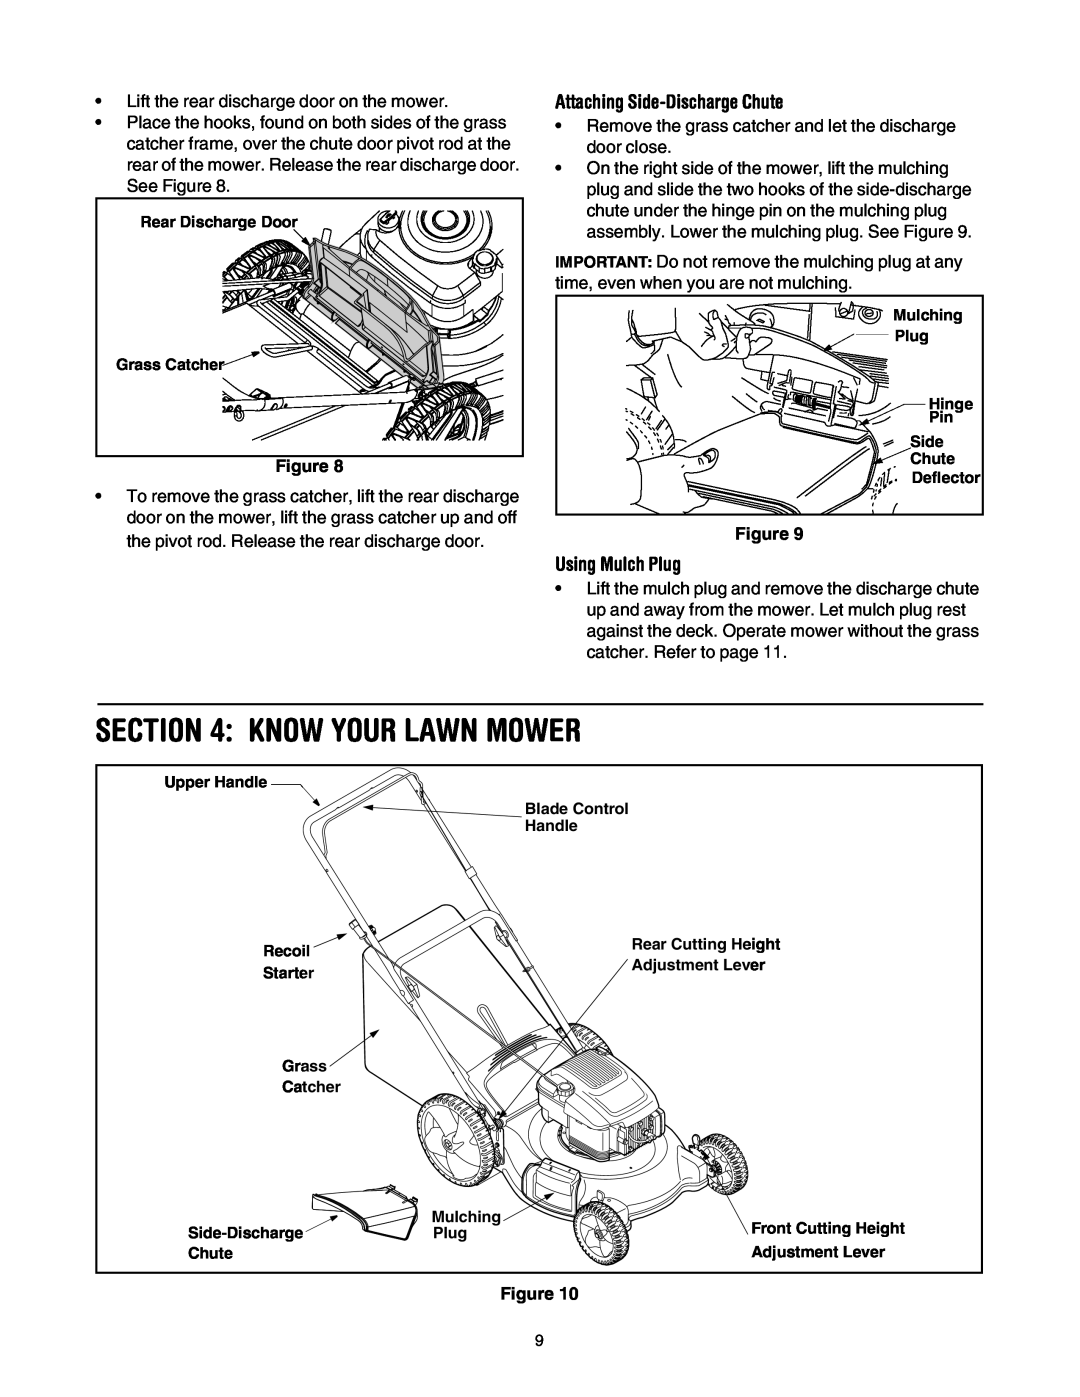 MTD 549 manual Know Your Lawn Mower, Attaching Side-Discharge Chute, Using Mulch Plug 